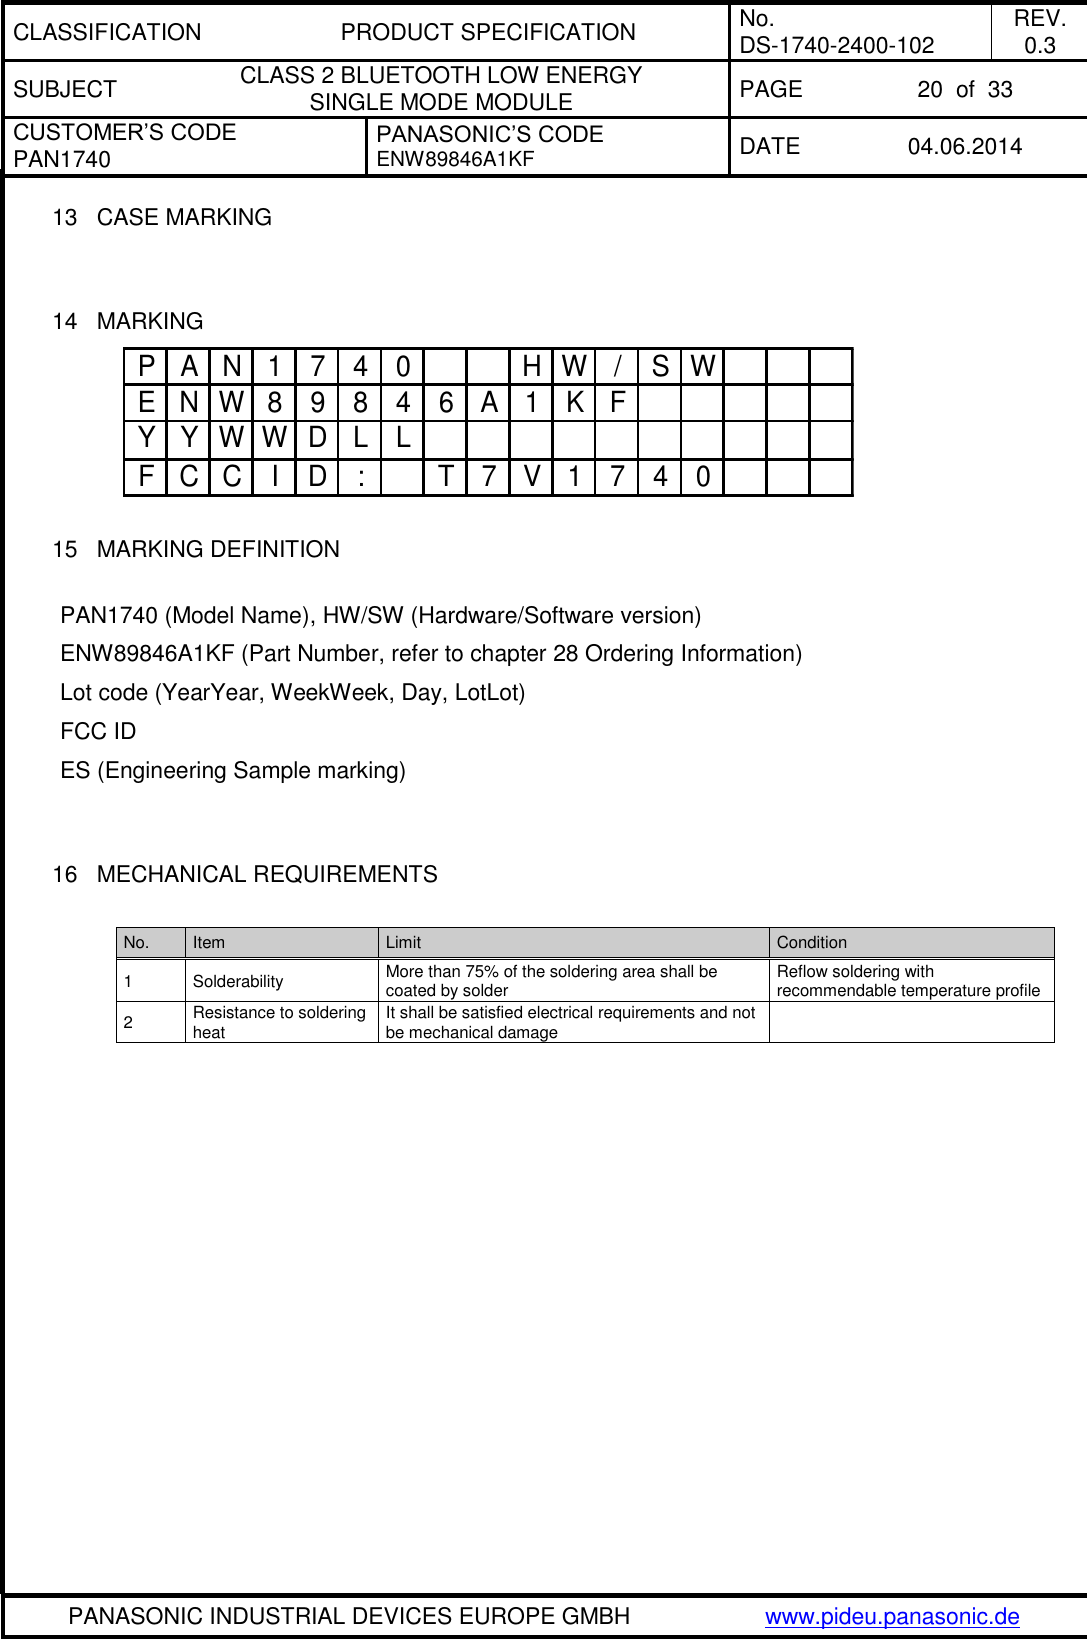 CLASSIFICATION PRODUCT SPECIFICATION No. DS-1740-2400-102 REV. 0.3 SUBJECT CLASS 2 BLUETOOTH LOW ENERGY  SINGLE MODE MODULE PAGE 20  of  33 CUSTOMER’S CODE PAN1740 PANASONIC’S CODE ENW89846A1KF DATE 04.06.2014   PANASONIC INDUSTRIAL DEVICES EUROPE GMBH www.pideu.panasonic.de  13 CASE MARKING   14  MARKING  15  MARKING DEFINITION  PAN1740 (Model Name), HW/SW (Hardware/Software version)  ENW89846A1KF (Part Number, refer to chapter 28 Ordering Information)  Lot code (YearYear, WeekWeek, Day, LotLot) FCC ID ES (Engineering Sample marking)     16  MECHANICAL REQUIREMENTS  No. Item Limit Condition 1 Solderability More than 75% of the soldering area shall be coated by solder Reflow soldering with recommendable temperature profile 2 Resistance to soldering heat It shall be satisfied electrical requirements and not be mechanical damage   P A N 1 7 4 0 H W / S WE N W 8 9 8 4 6 A 1 K FY Y W W D L LF C C I D : T 7 V 1 7 4 0